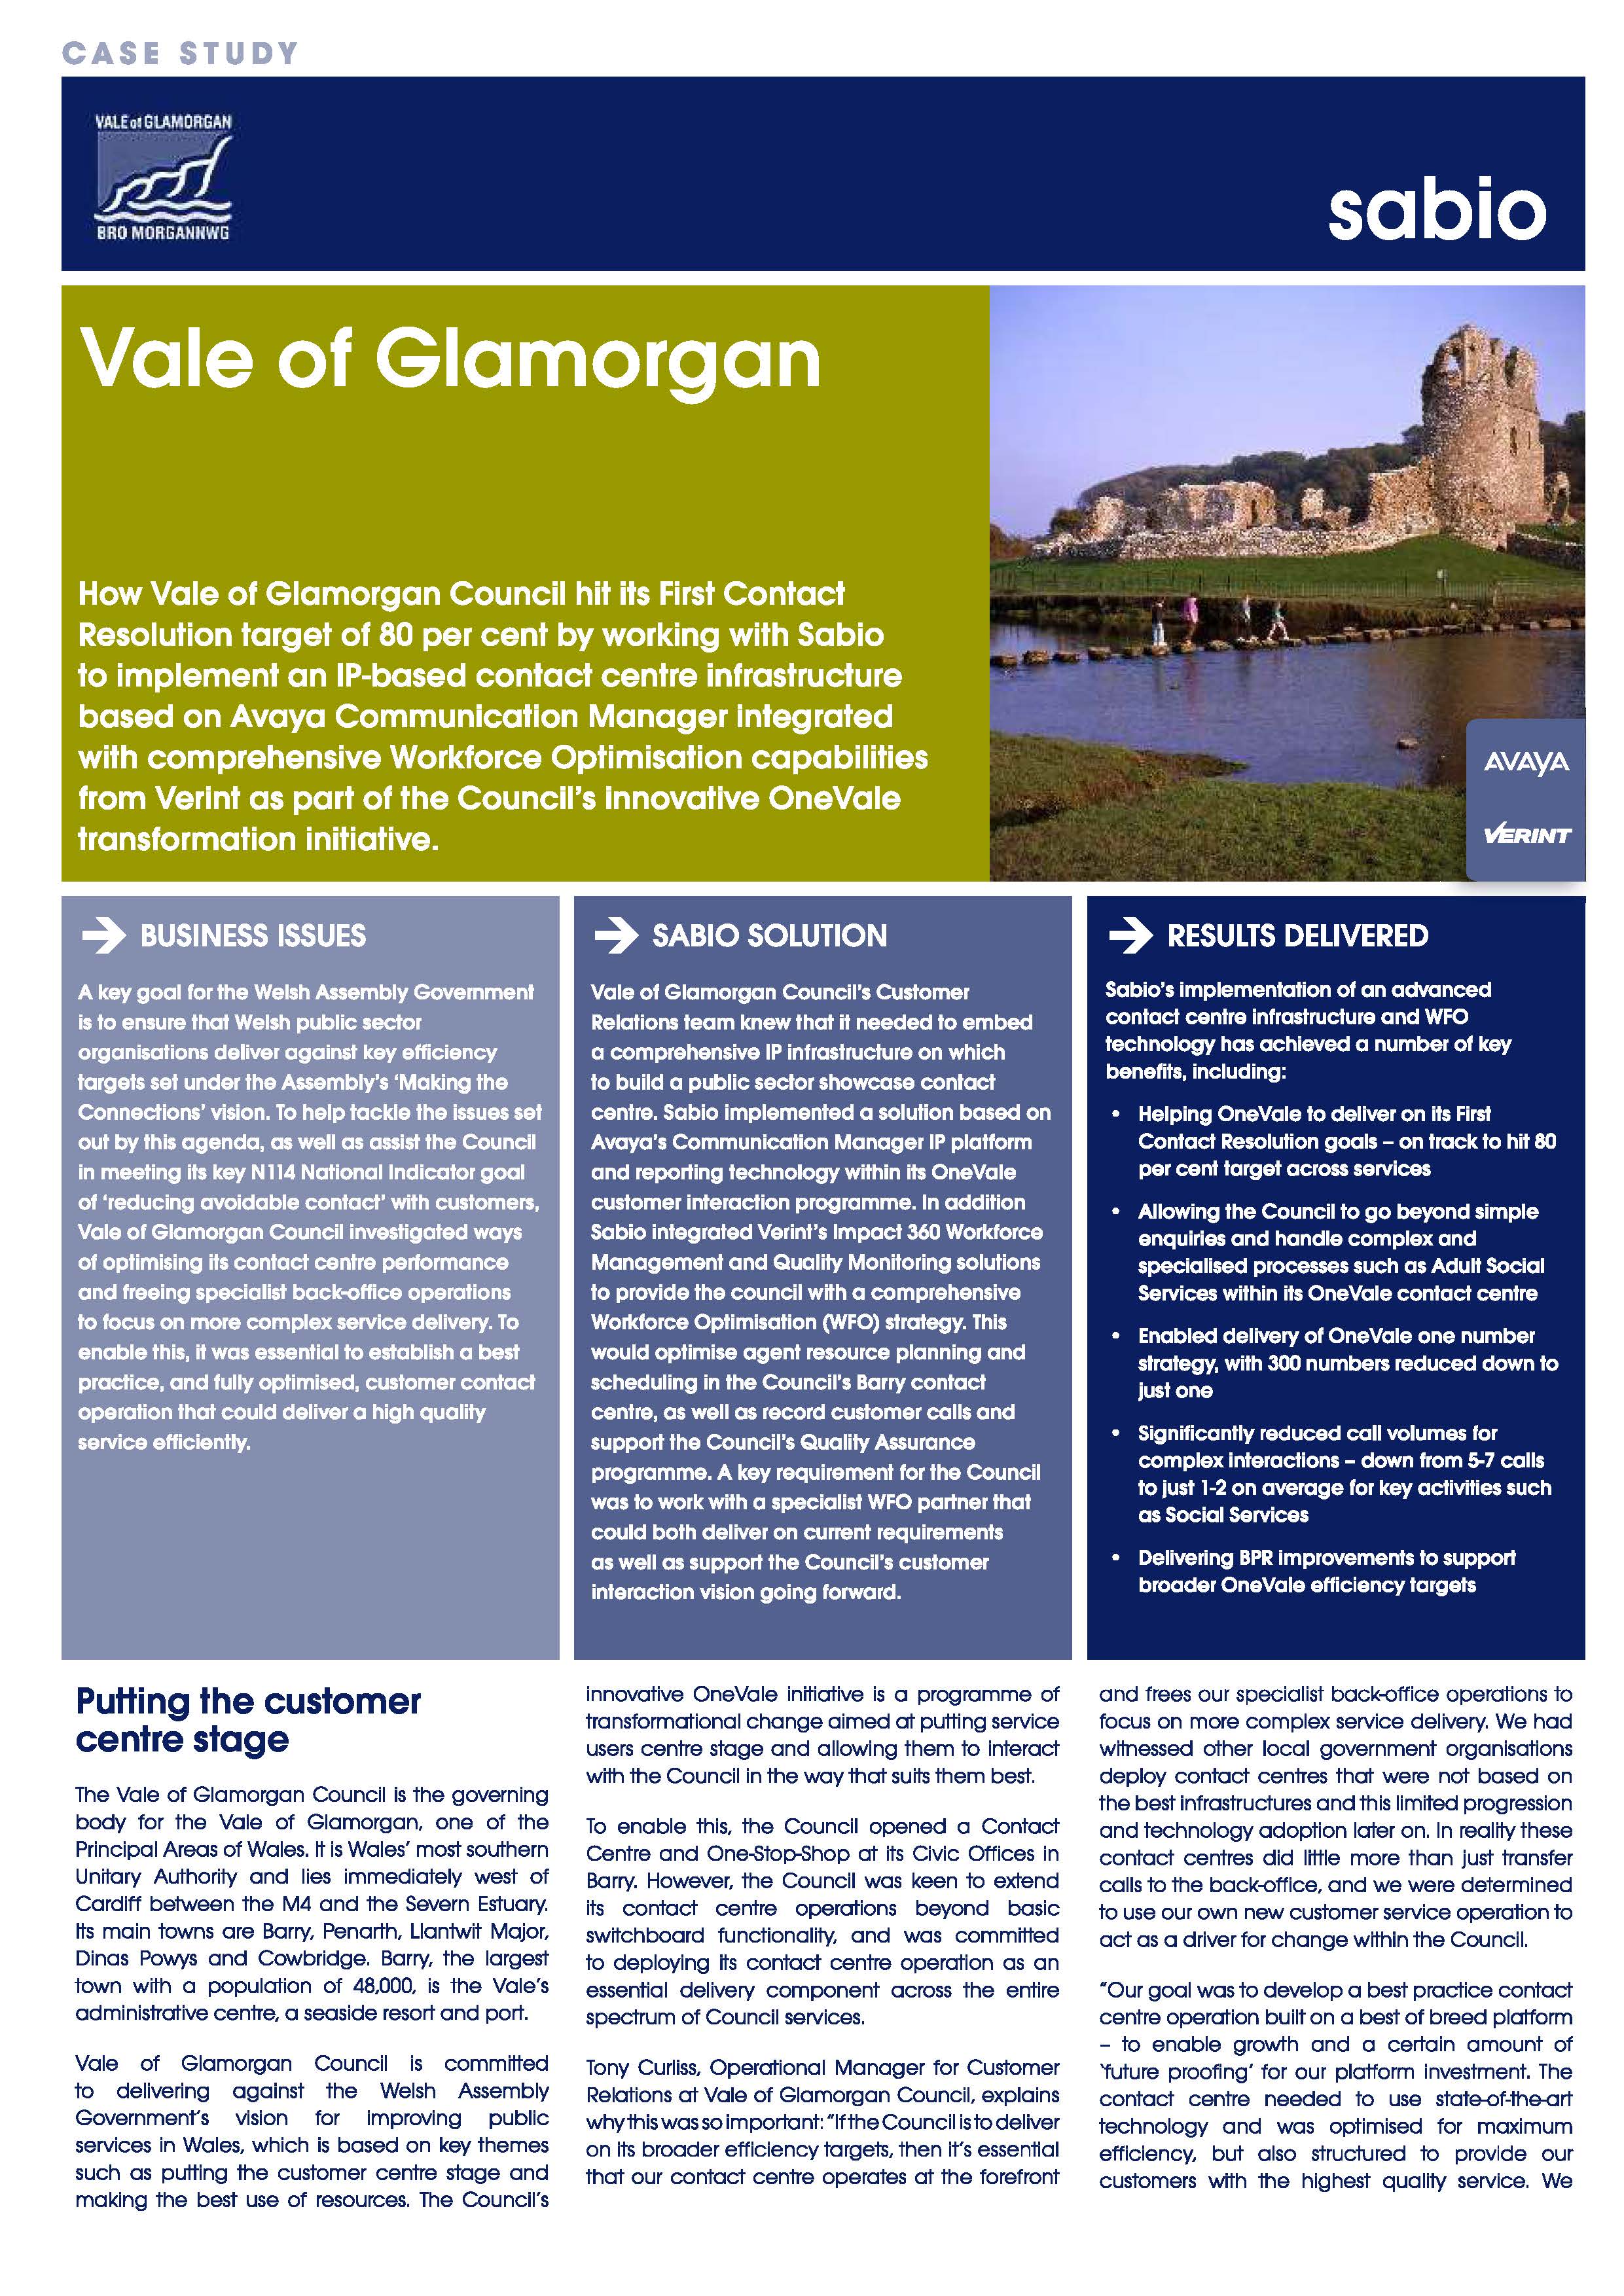 Call Centre IP Telephony Infrastructure for Vale of Glamorgan